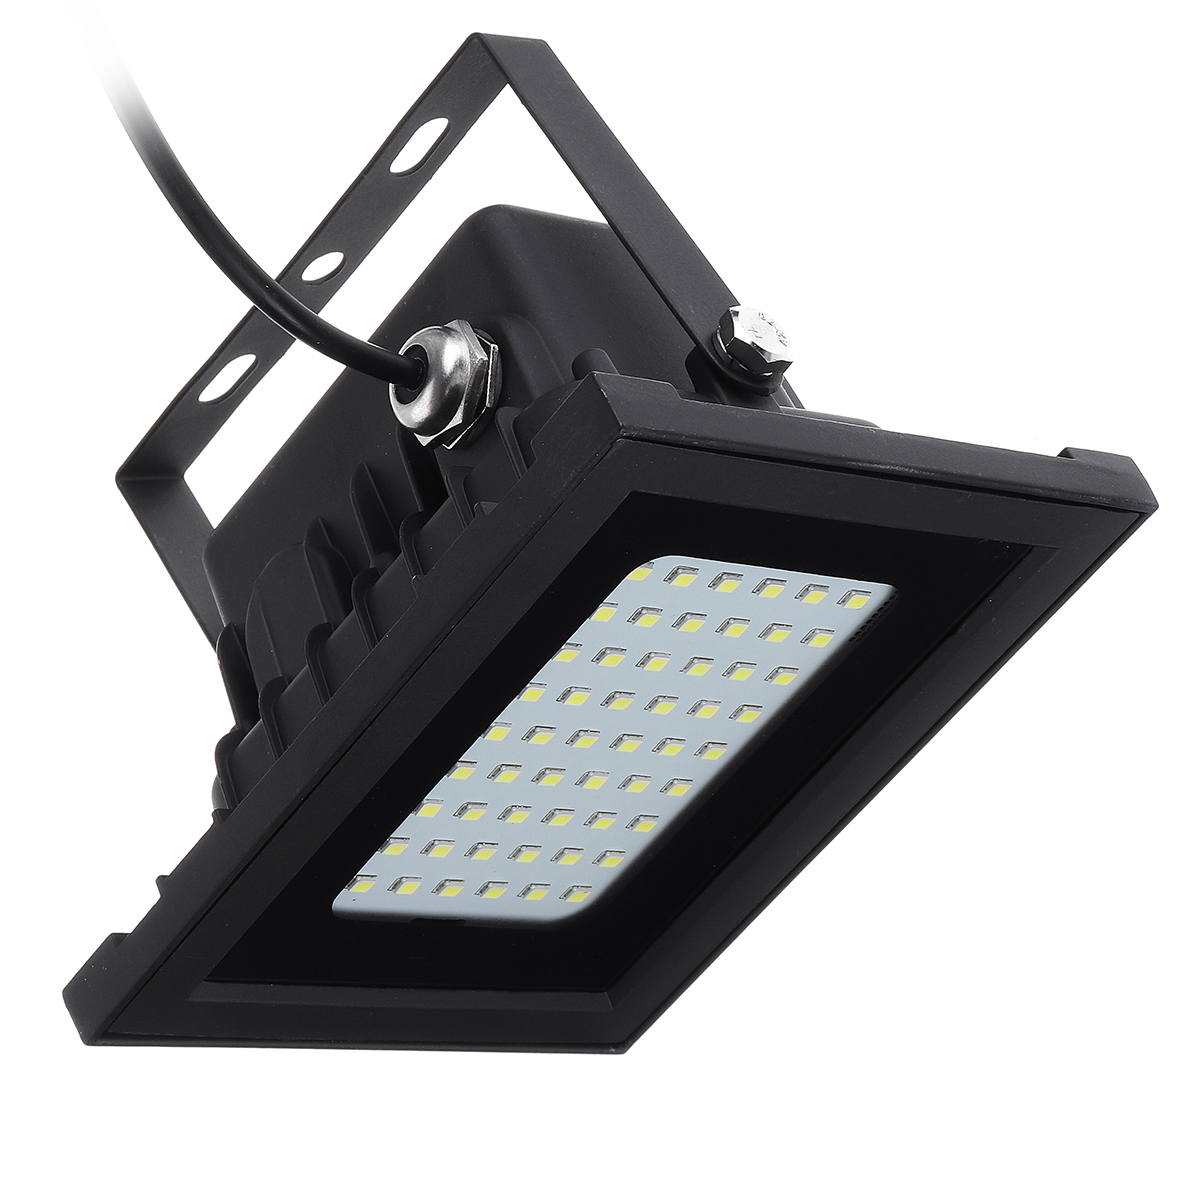 400LM 54 LED Solar Panel Flood Light Spotlight Project Lamp IP65 Waterproof Outdoor Camping Emergency Lantern With Remote Control 4